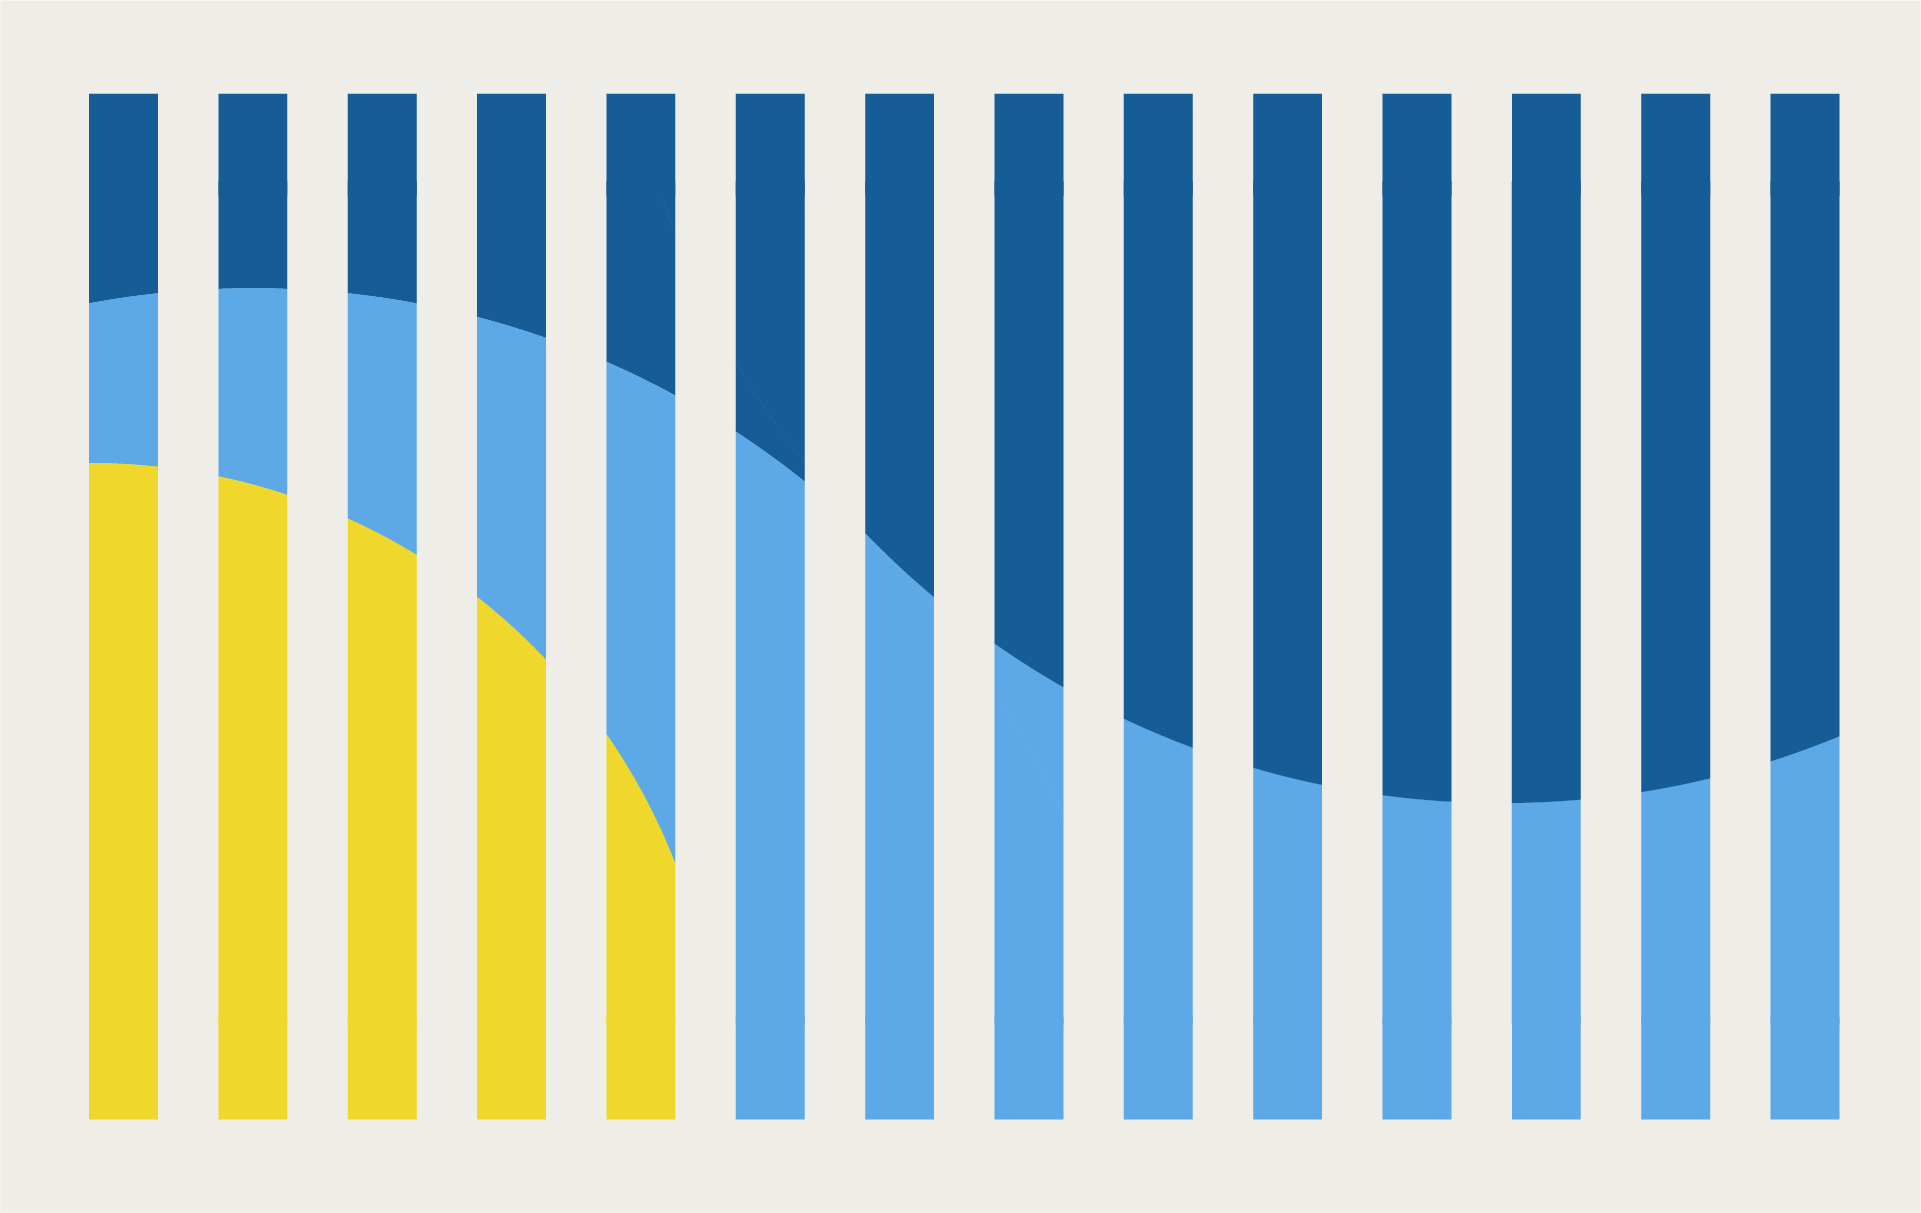 Clickable graphic for the Ferry Guide: vertical lines with a colored pattern of yellow, light blue, and dark blue